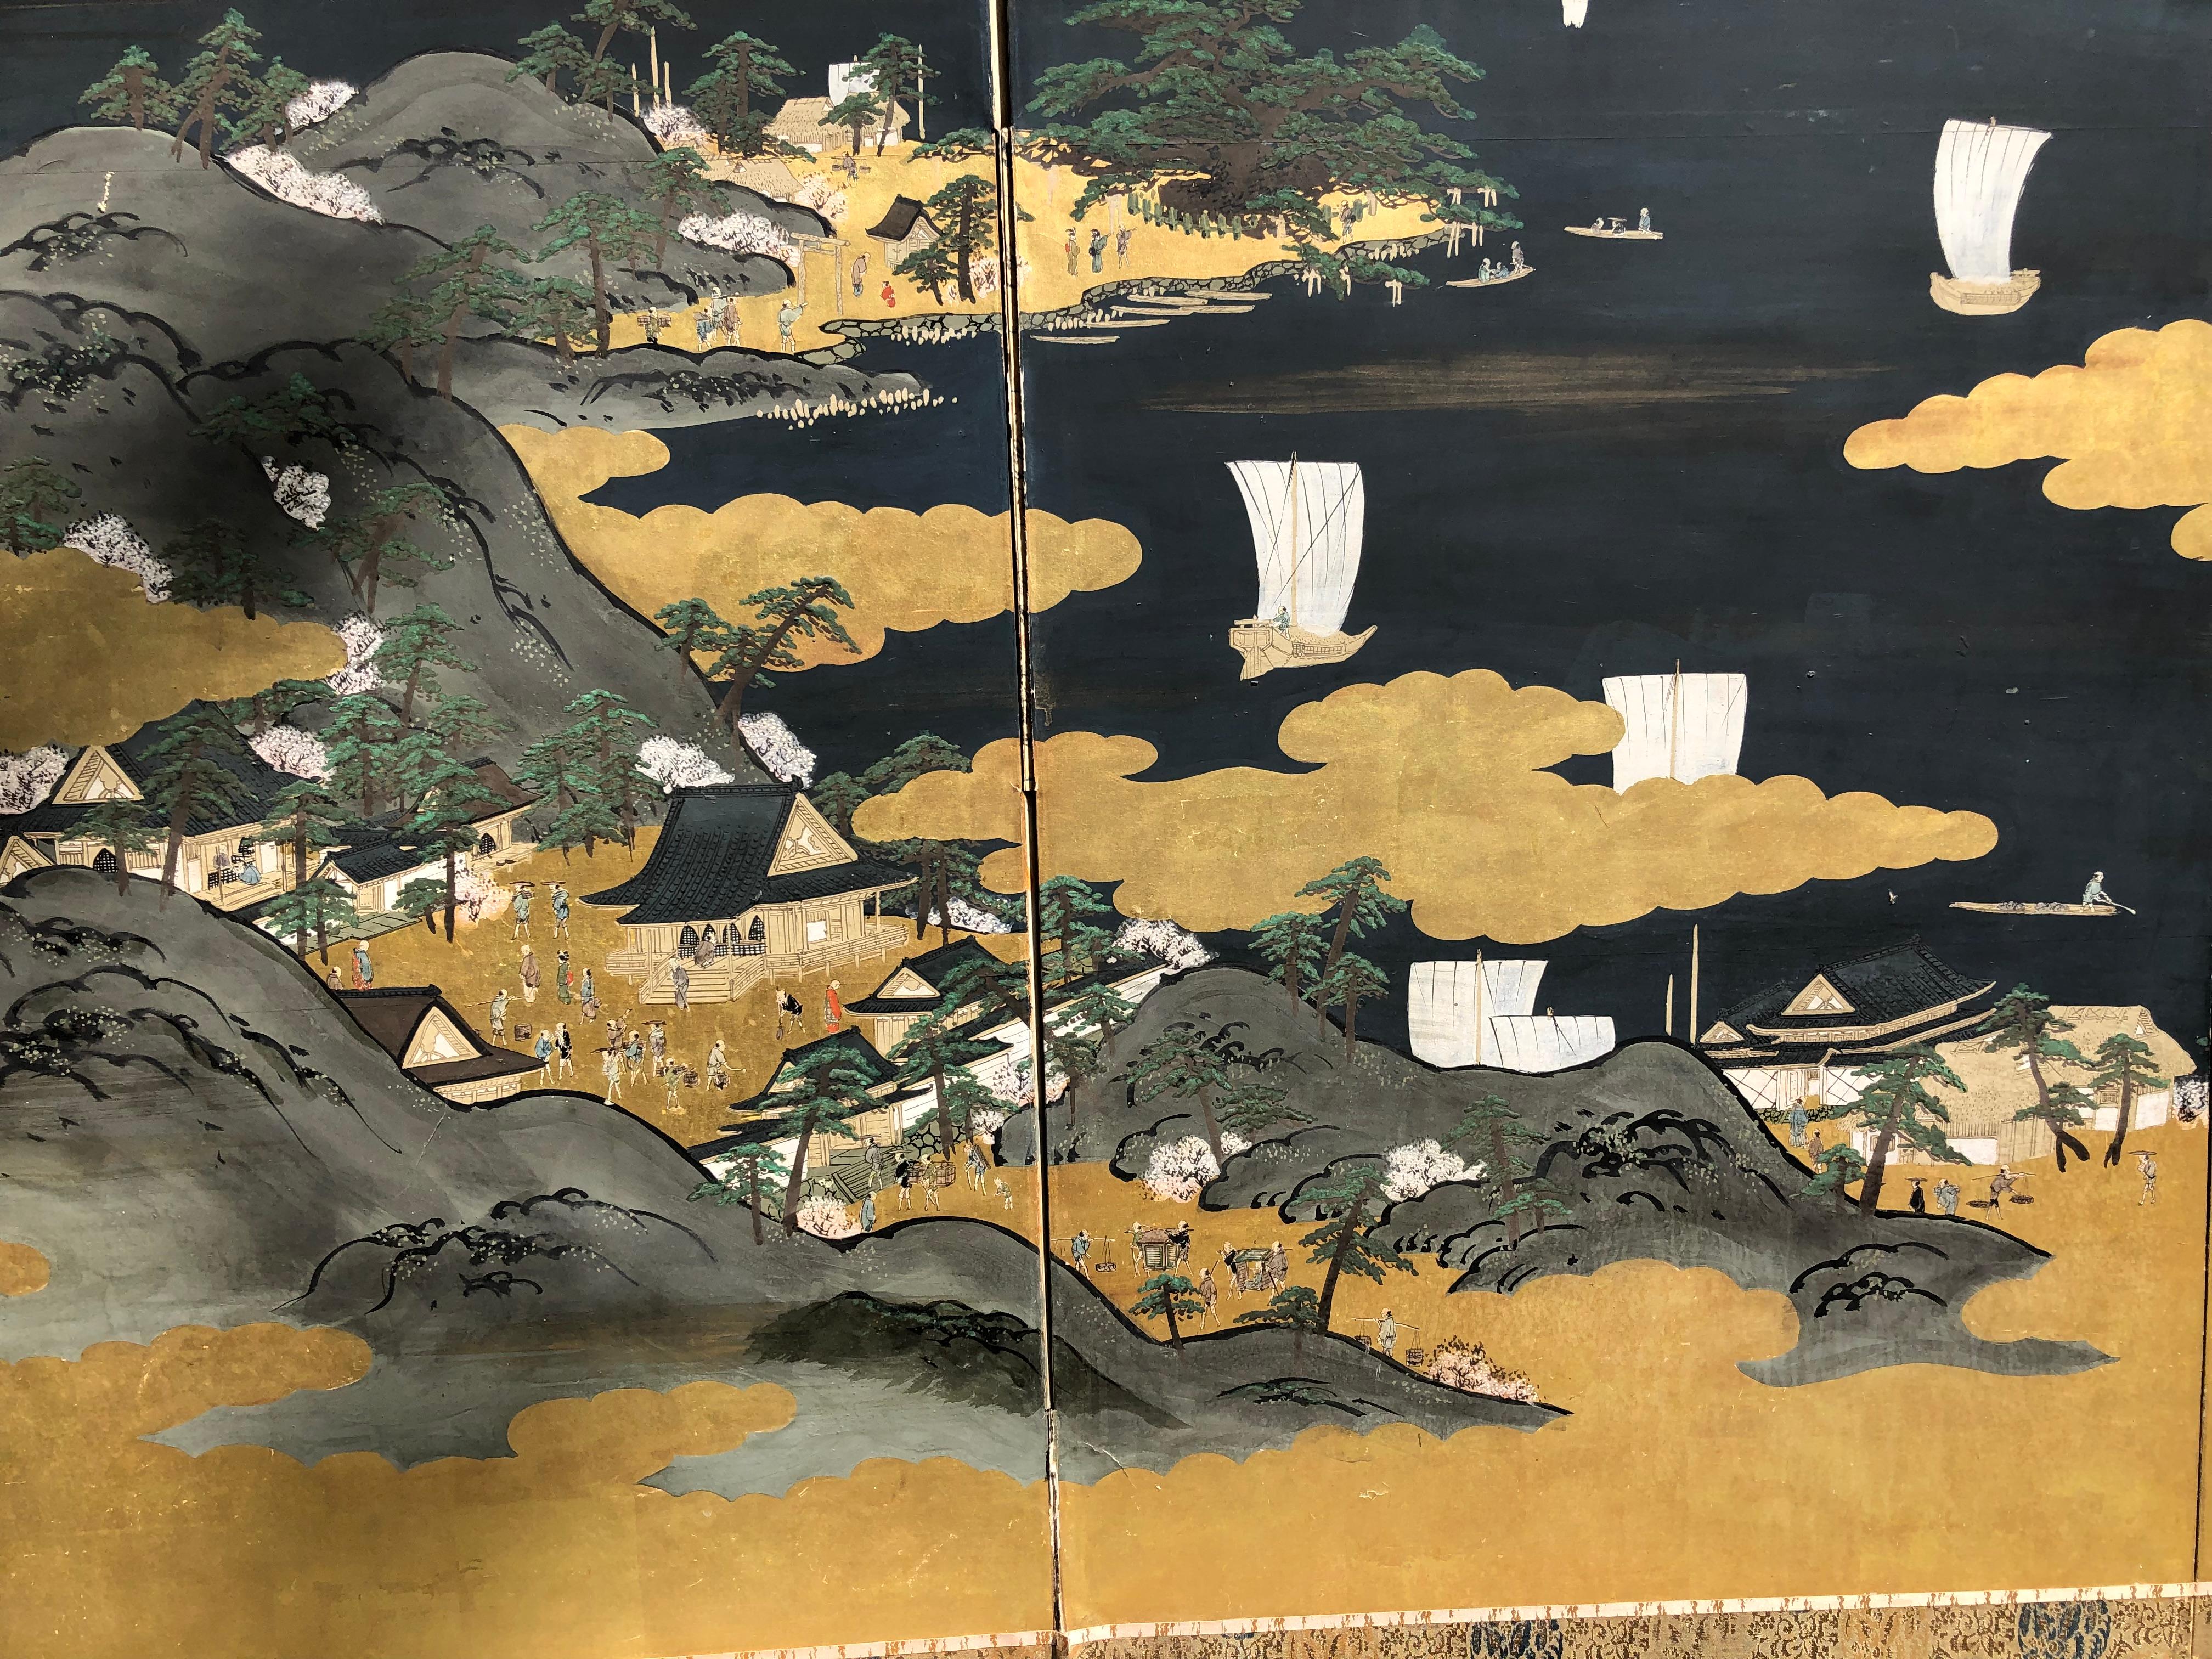 Japan, a six-panel screen Byobu depicting sailing boats on blue waters. This attractive screen dates to the 1930s-1940s.

Sail boating is a scarce motif for Japanese screens and we are pleased to have found this one on our last Japanese